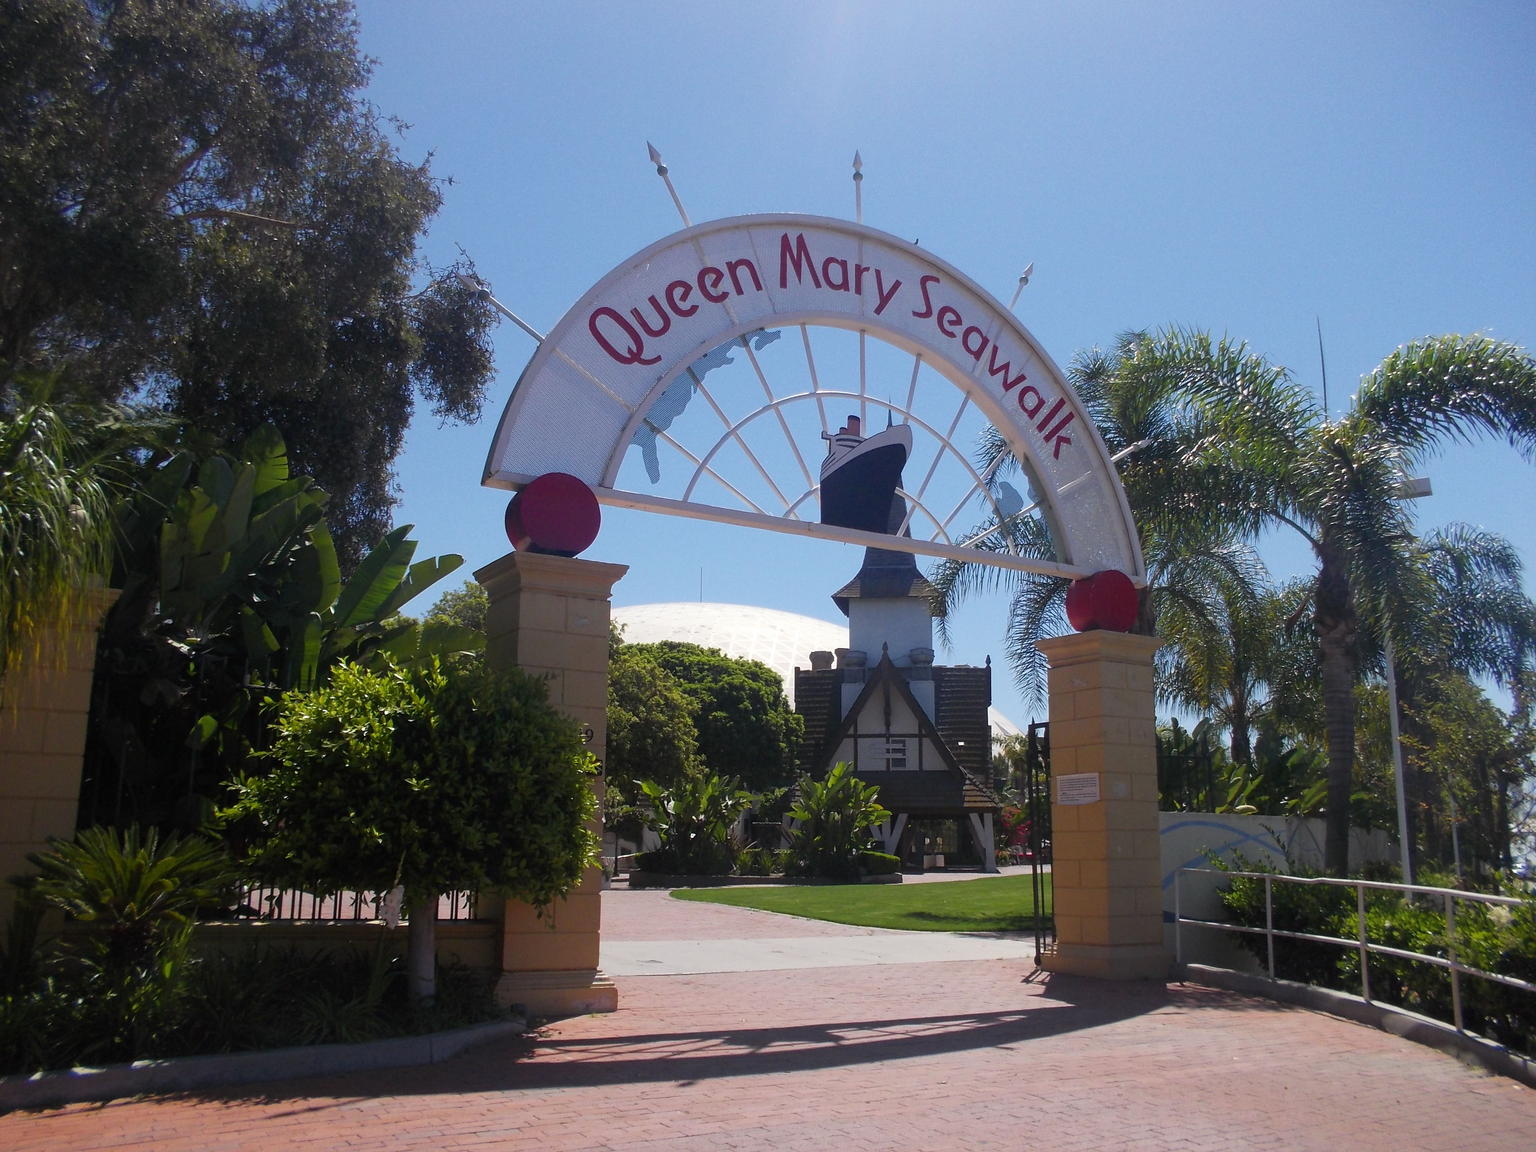 The Queen Mary entrance